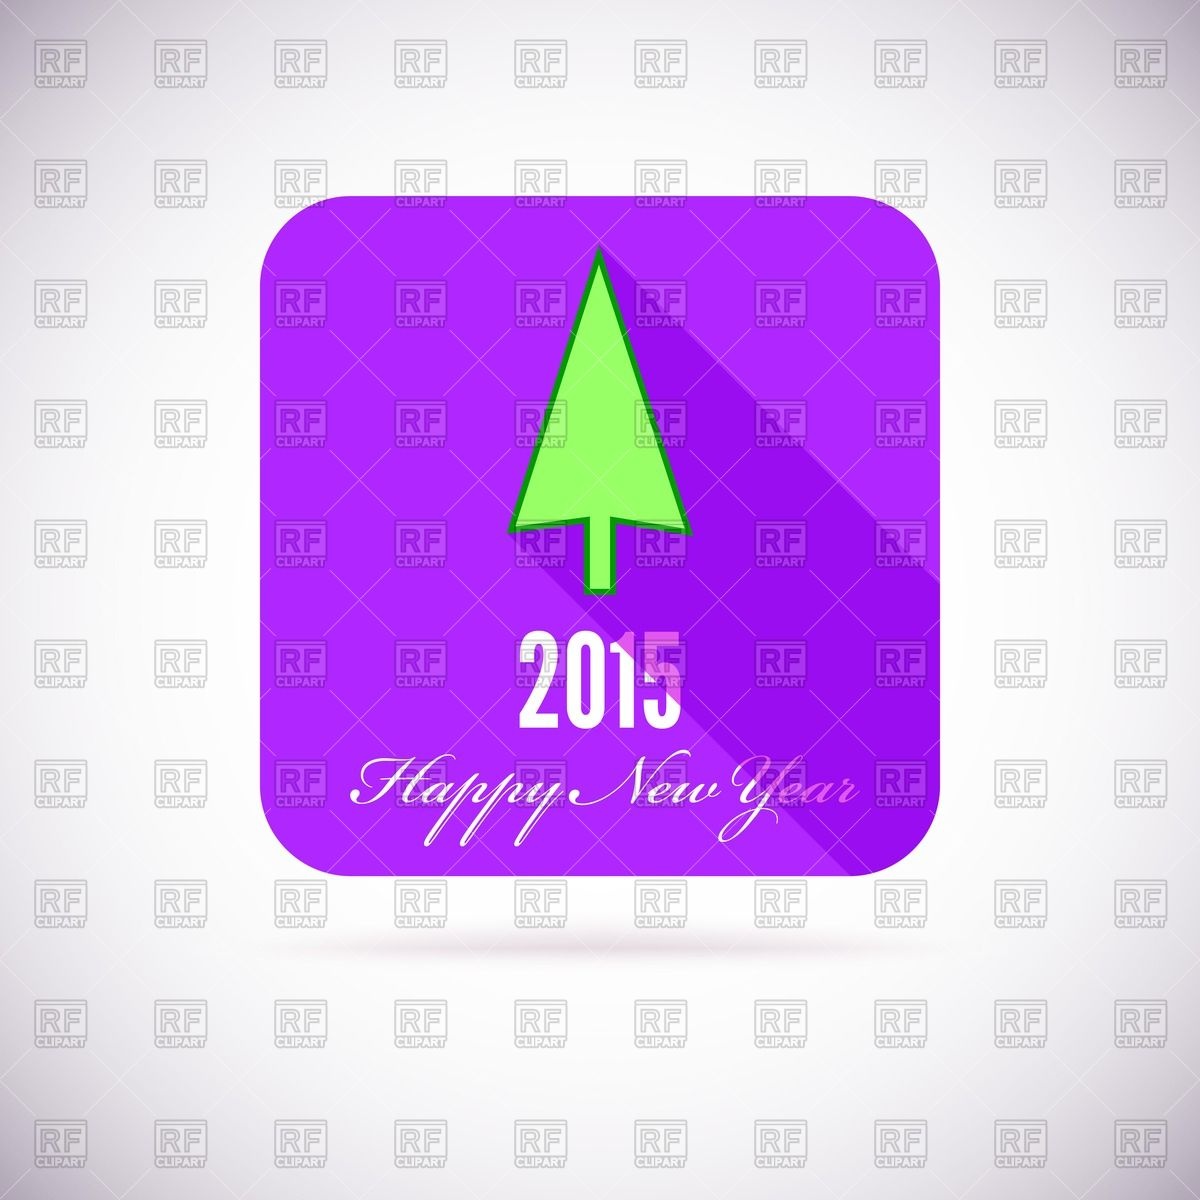 Free Icons Happy New Year 2015